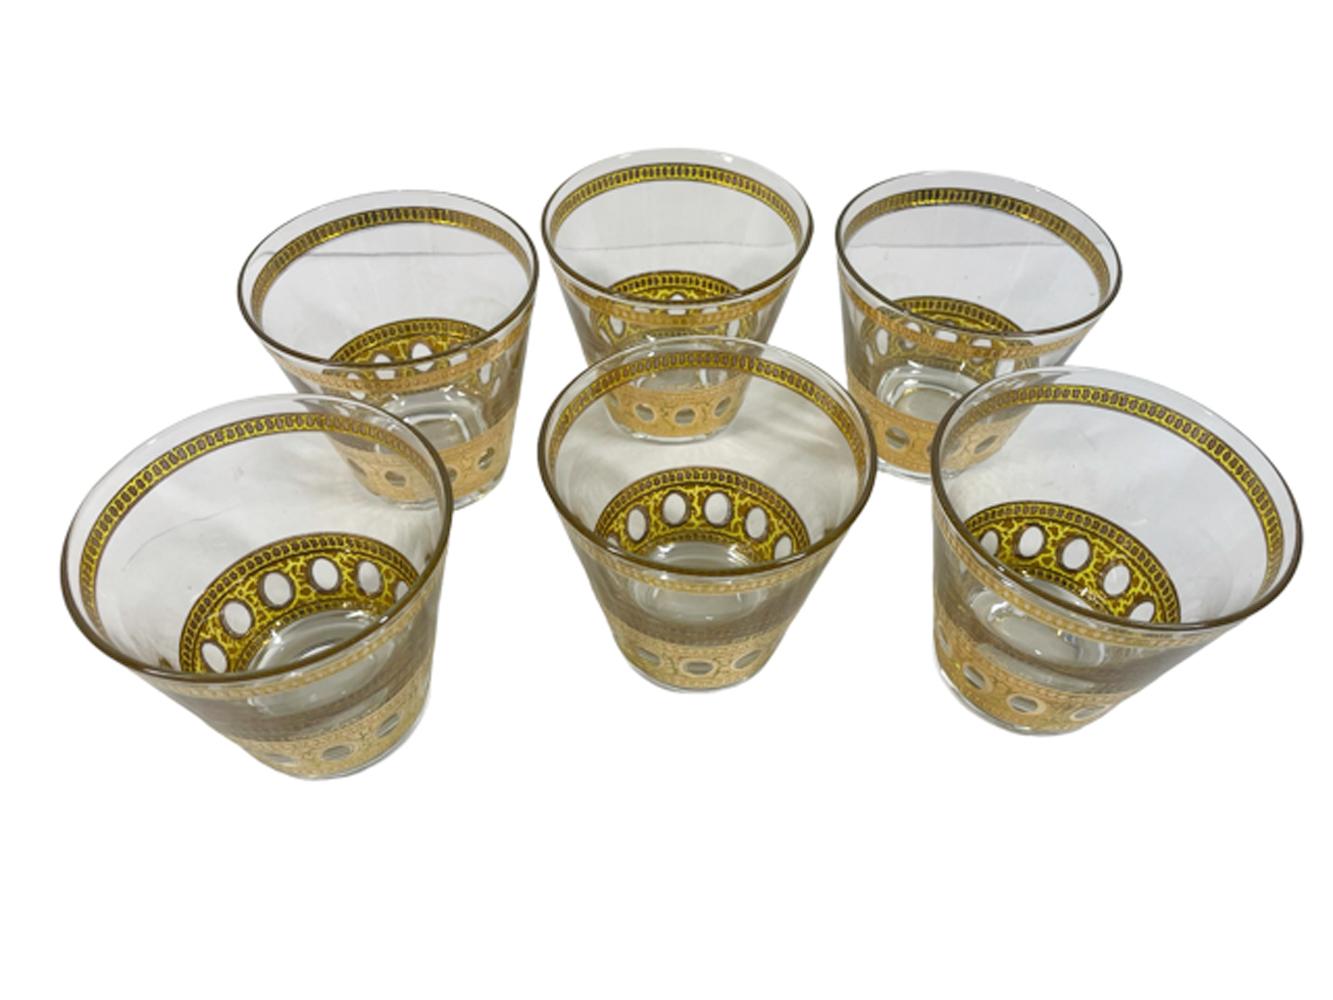 American 6 Vintage Culver LTD Old Fashioned Glasses in the 22 Karat Gold Antigua Pattern